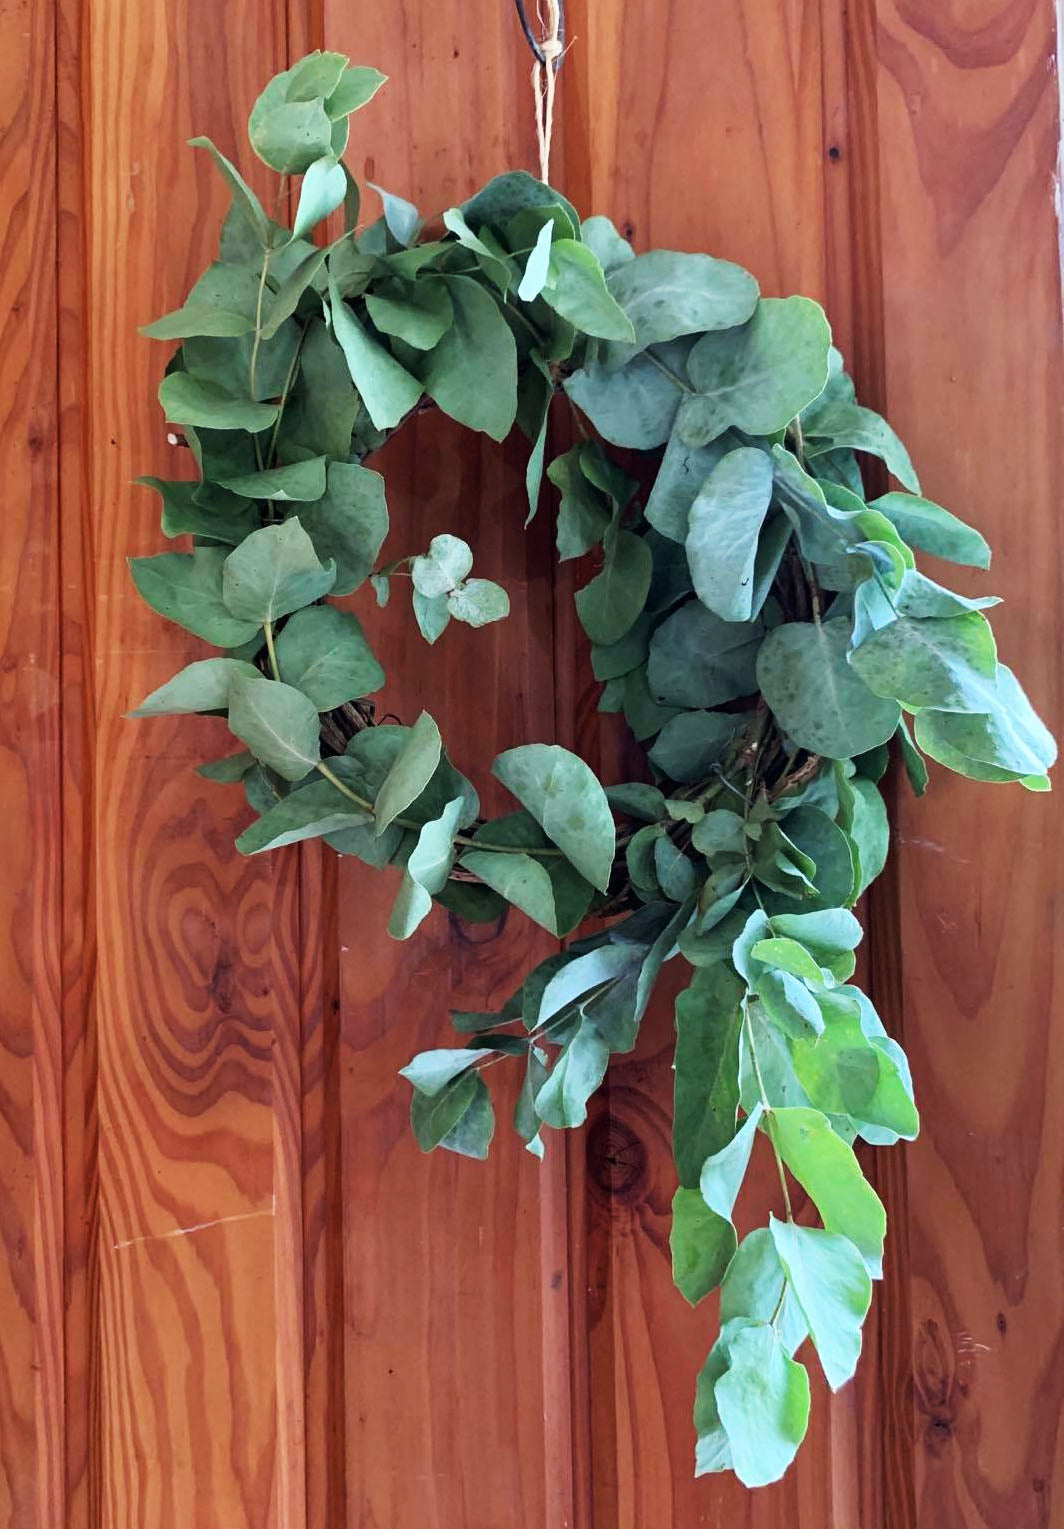 Dried Eucalyptus Wreath small size vintage style harvested from NZ lavender farm